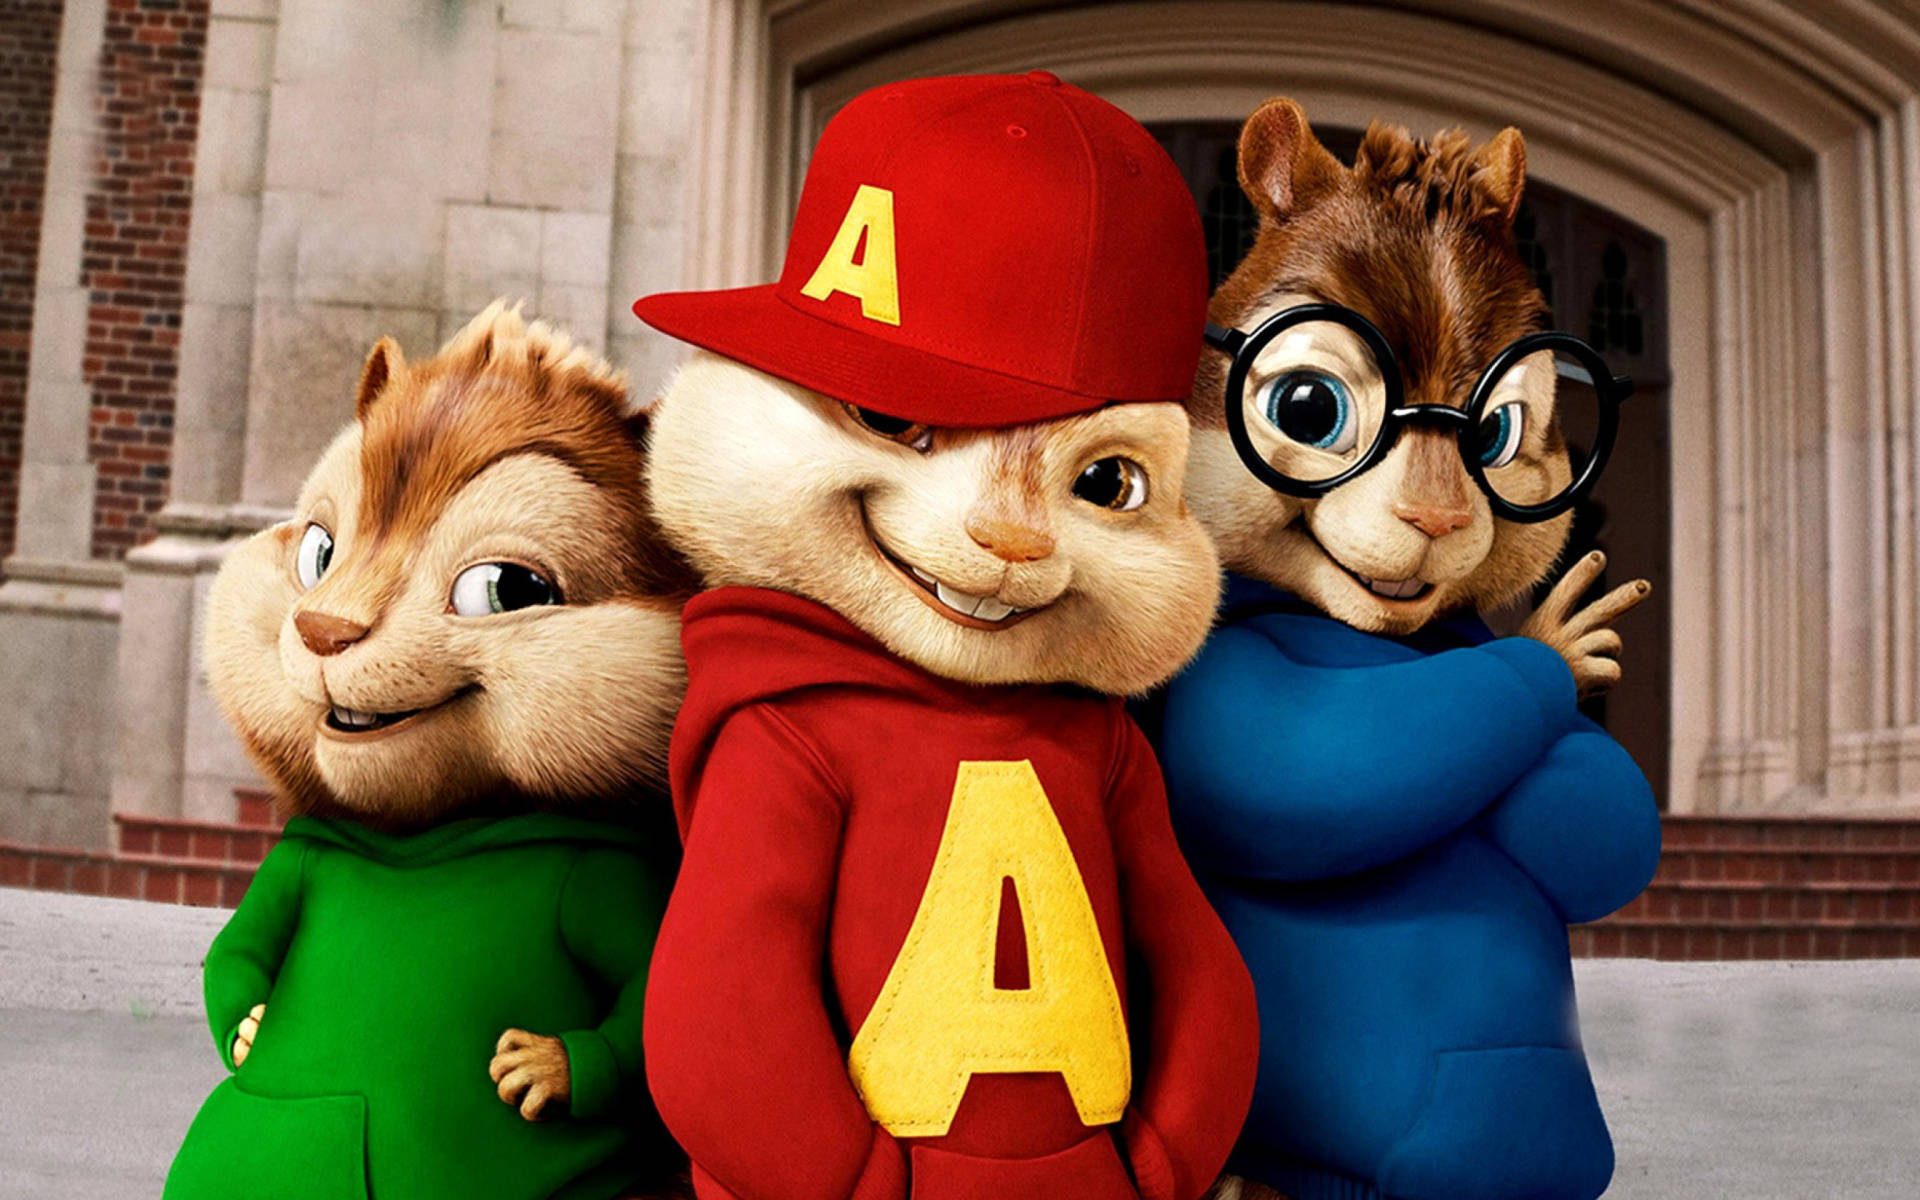 100+] Alvin And The Chipmunks Wallpapers 